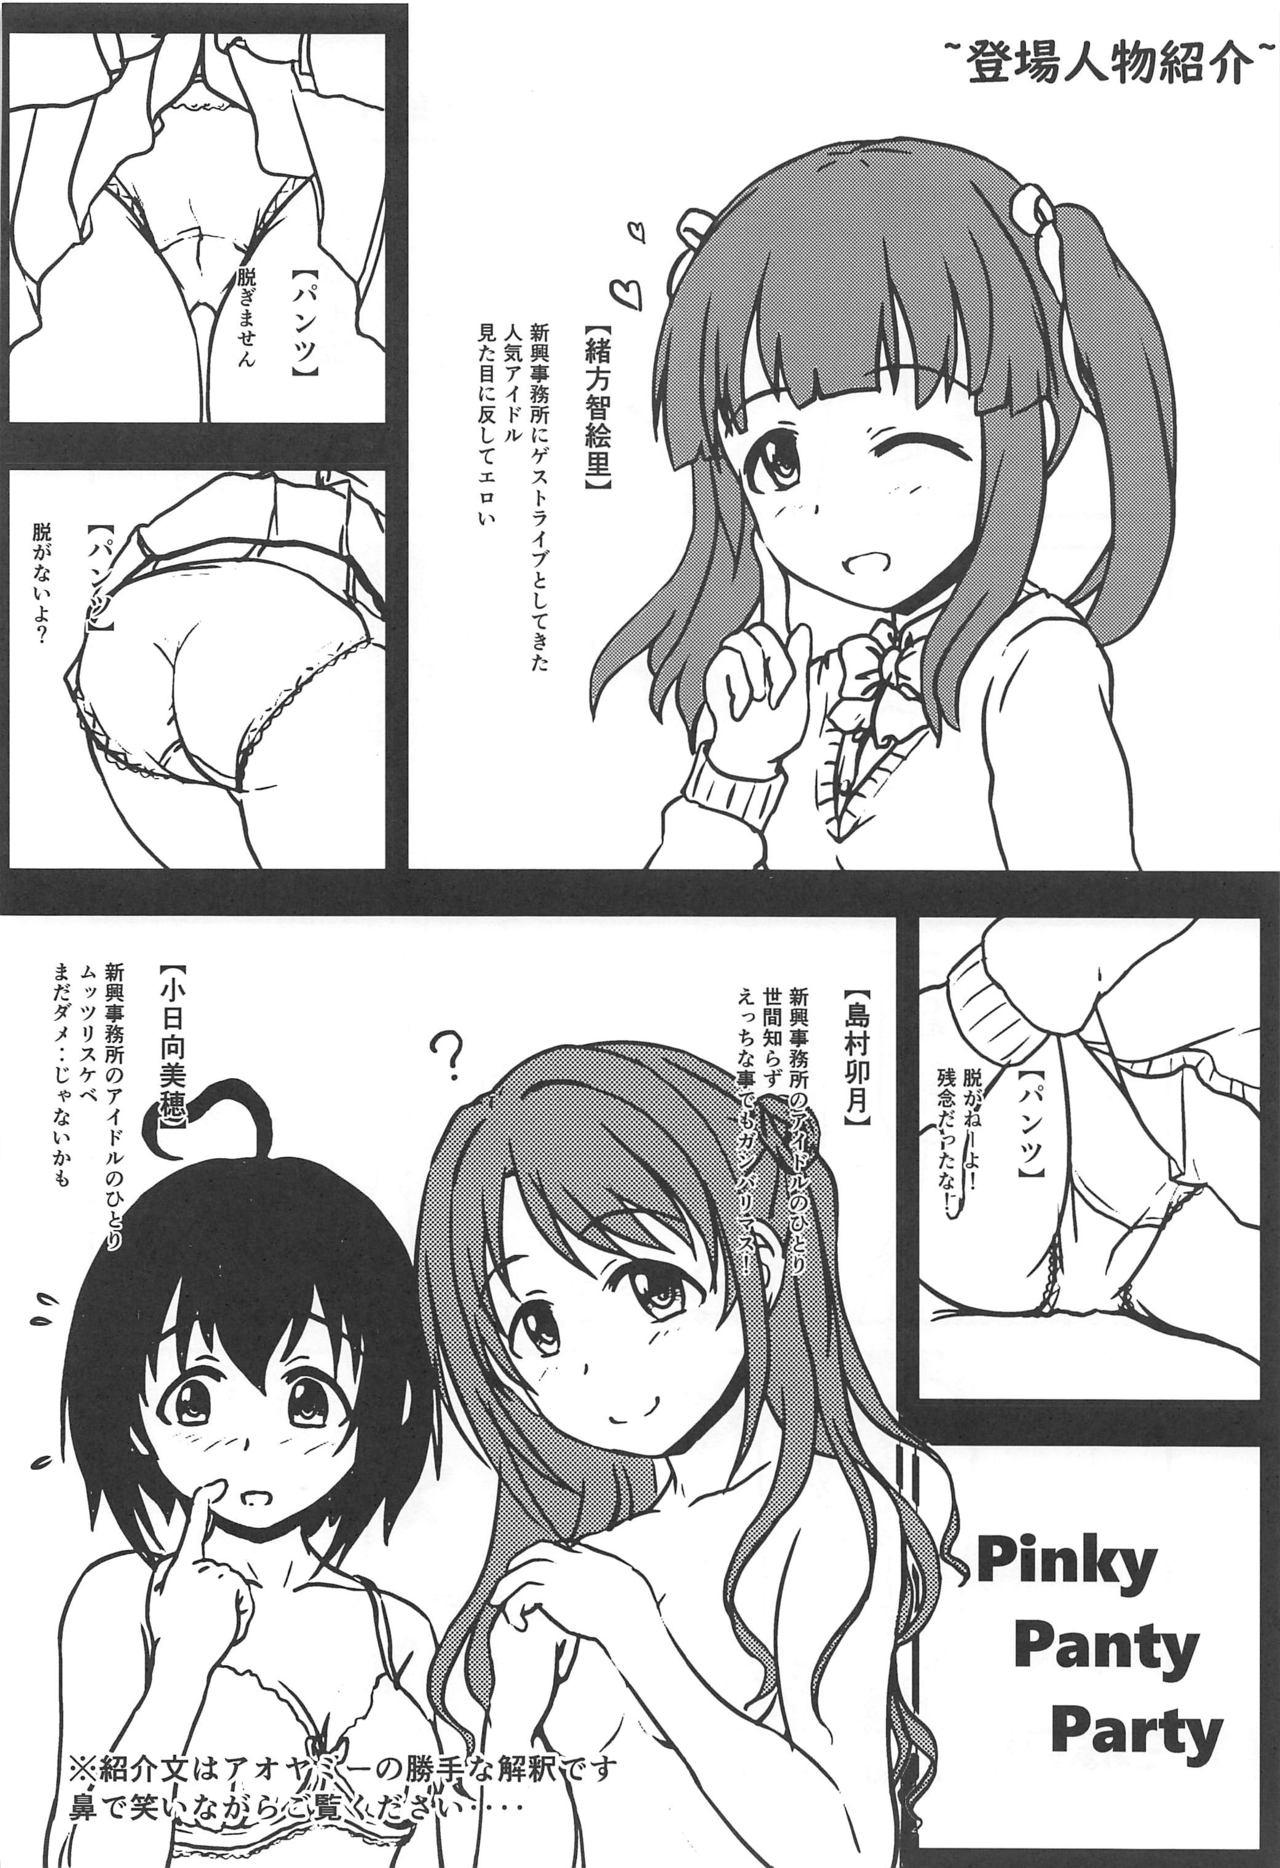 Desperate Pinky Panty Party - The idolmaster Pink - Page 3